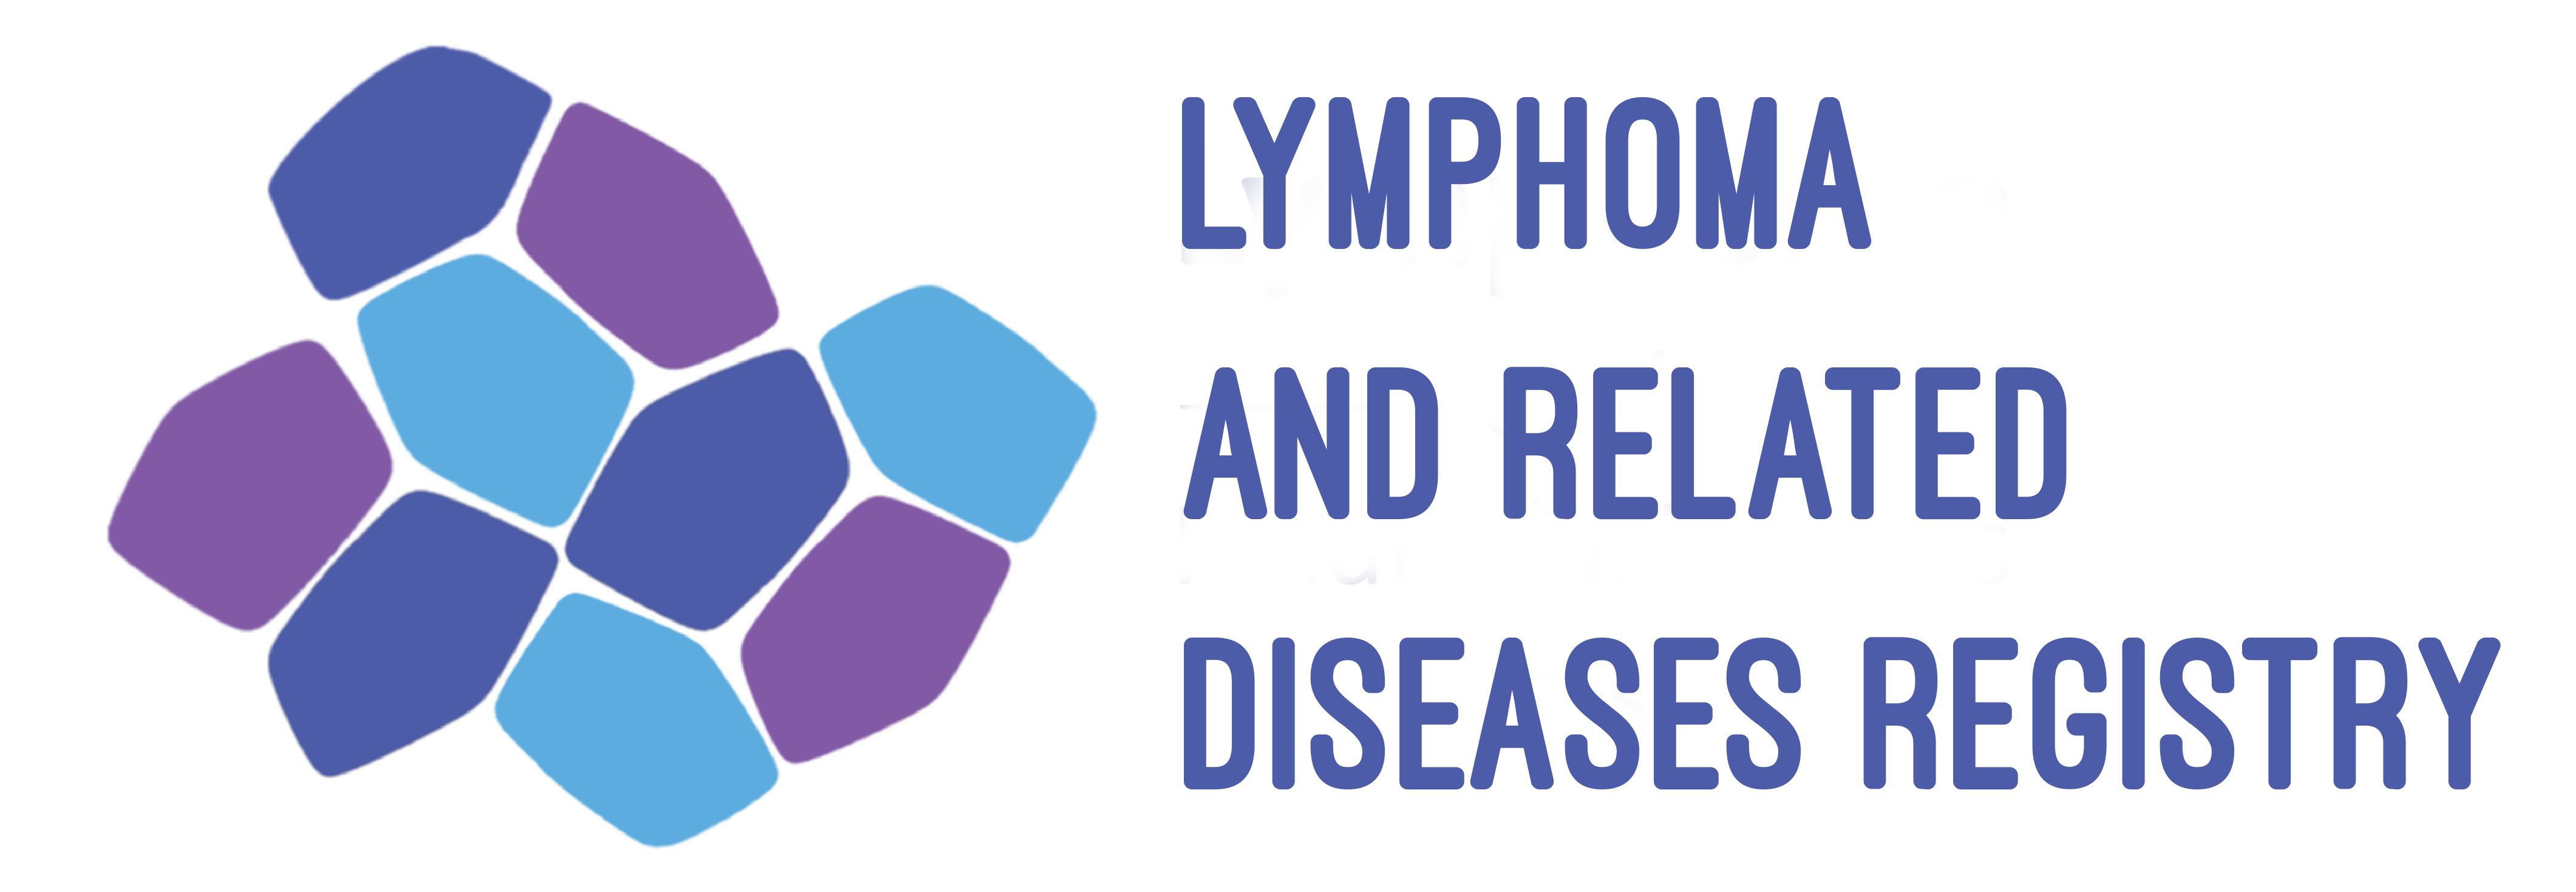 Lymphoma and Related Diseases Registry